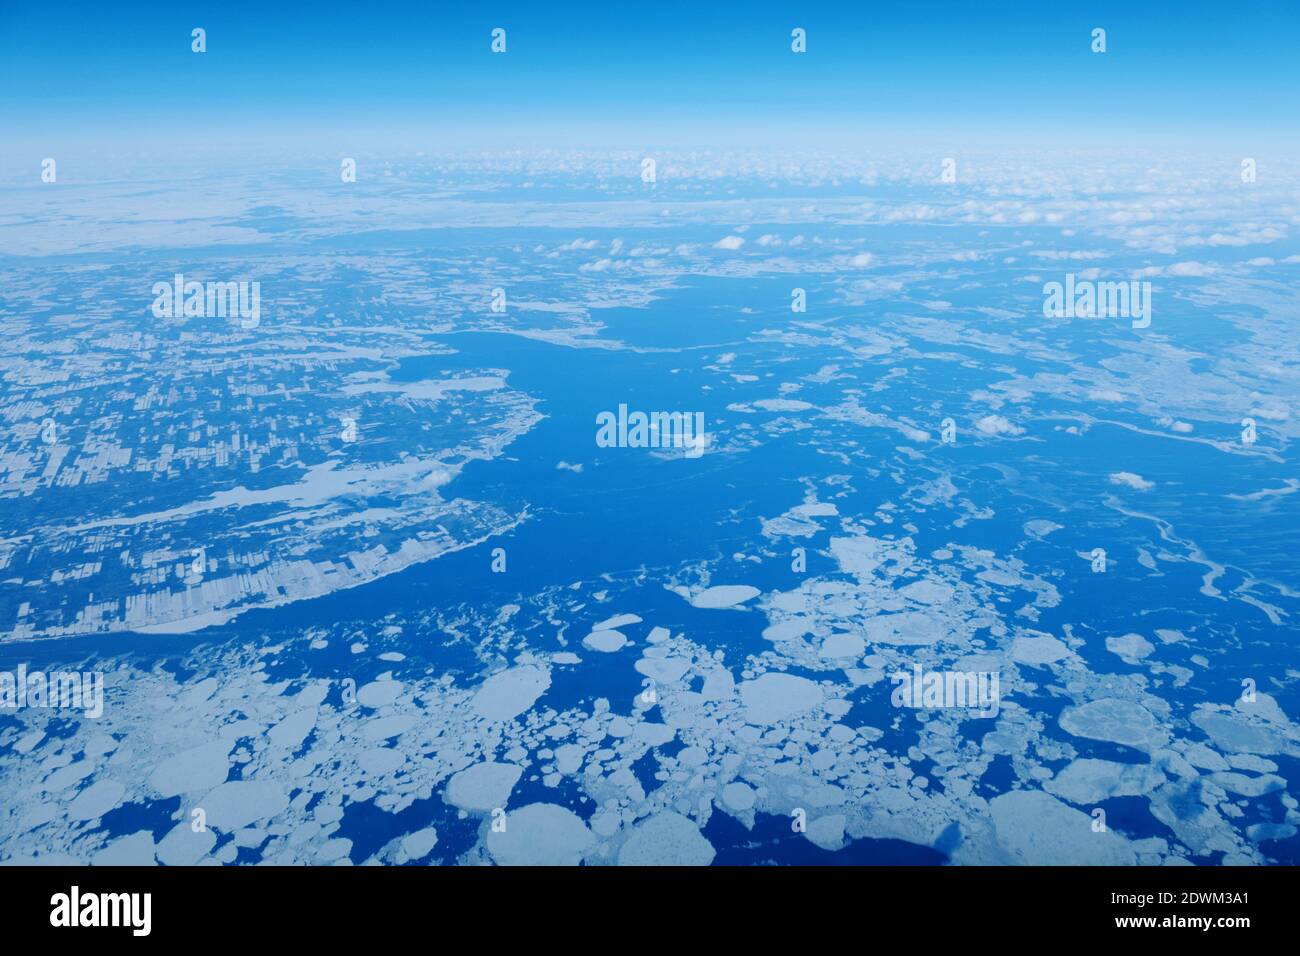 Aerial View Of Snowcapped Landscape Against Sky Stock Photo